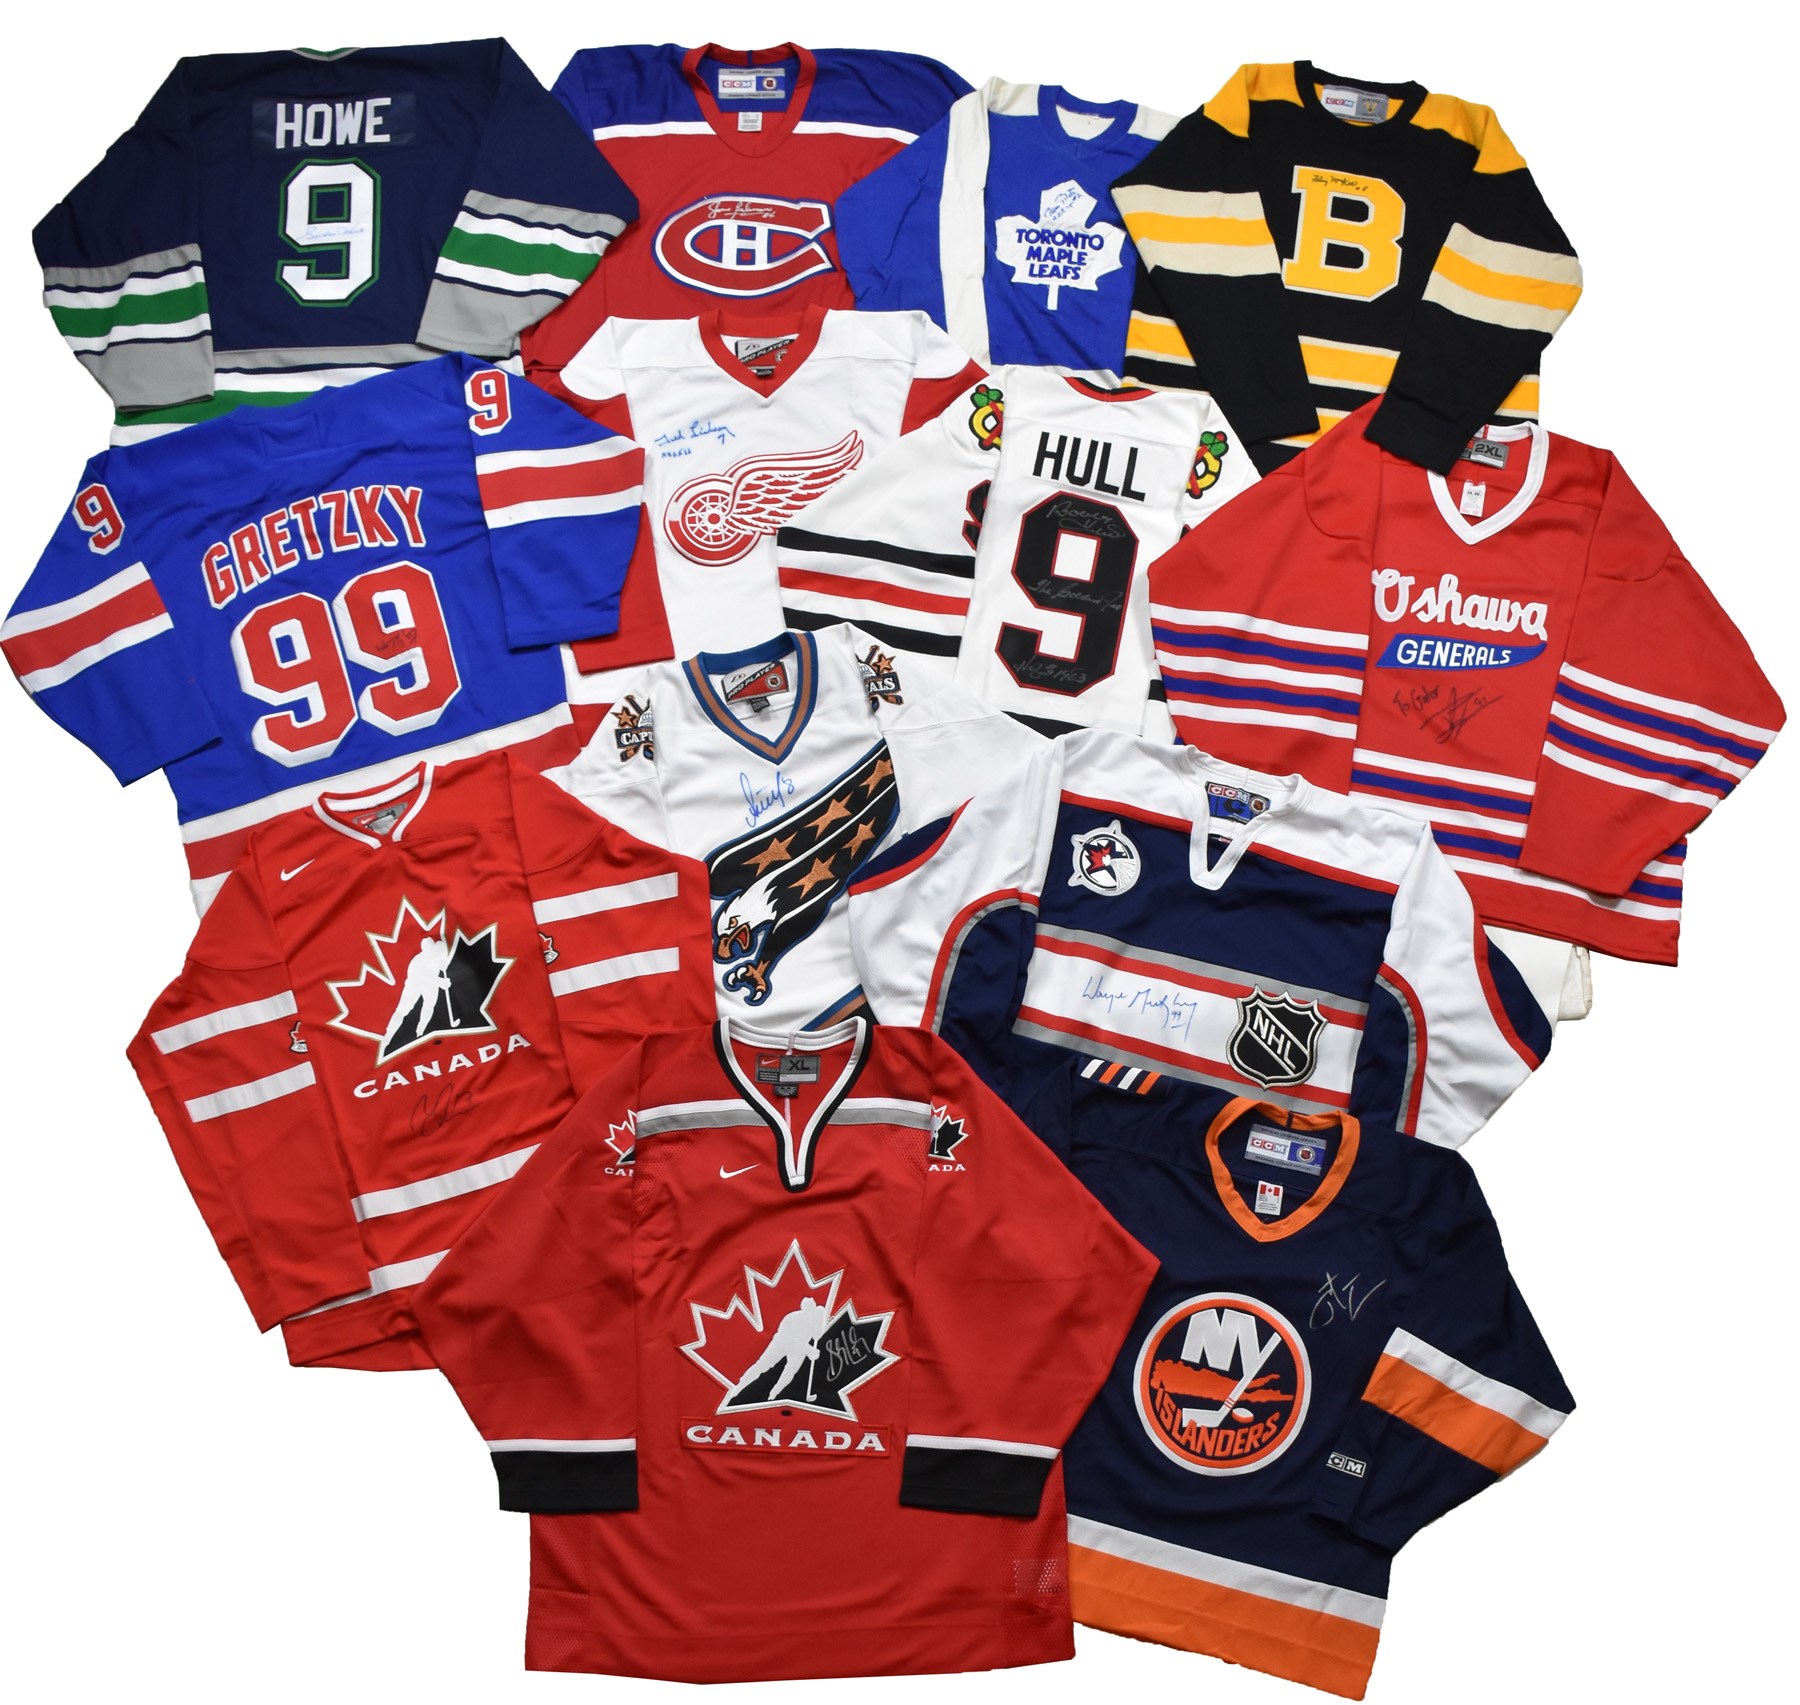 Hockey - Enormous Hockey Signed Jersey Collection with All-Time Legends - Gretzky, Howe, Crosby, McDavid, Ovechkin, Beliveau (250+)